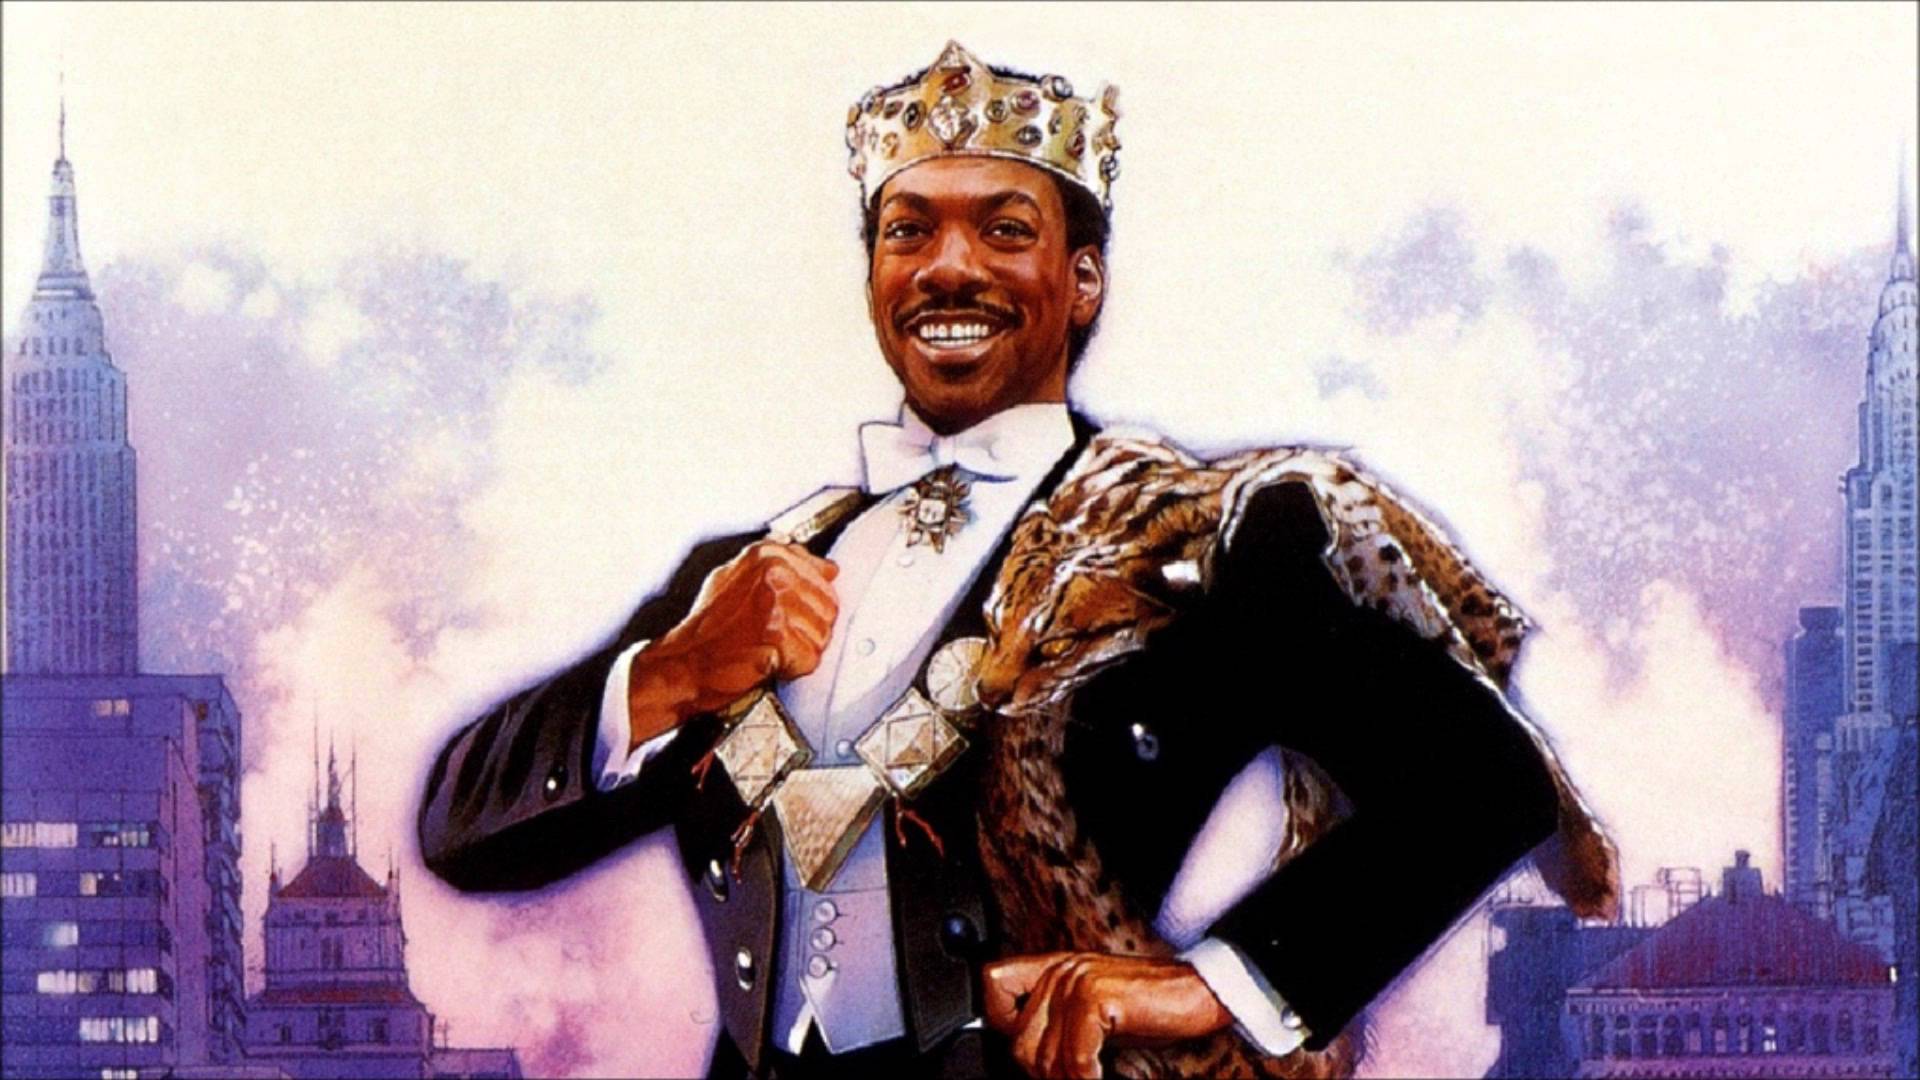 Coming To America Sequel.IS Happening! 92.5